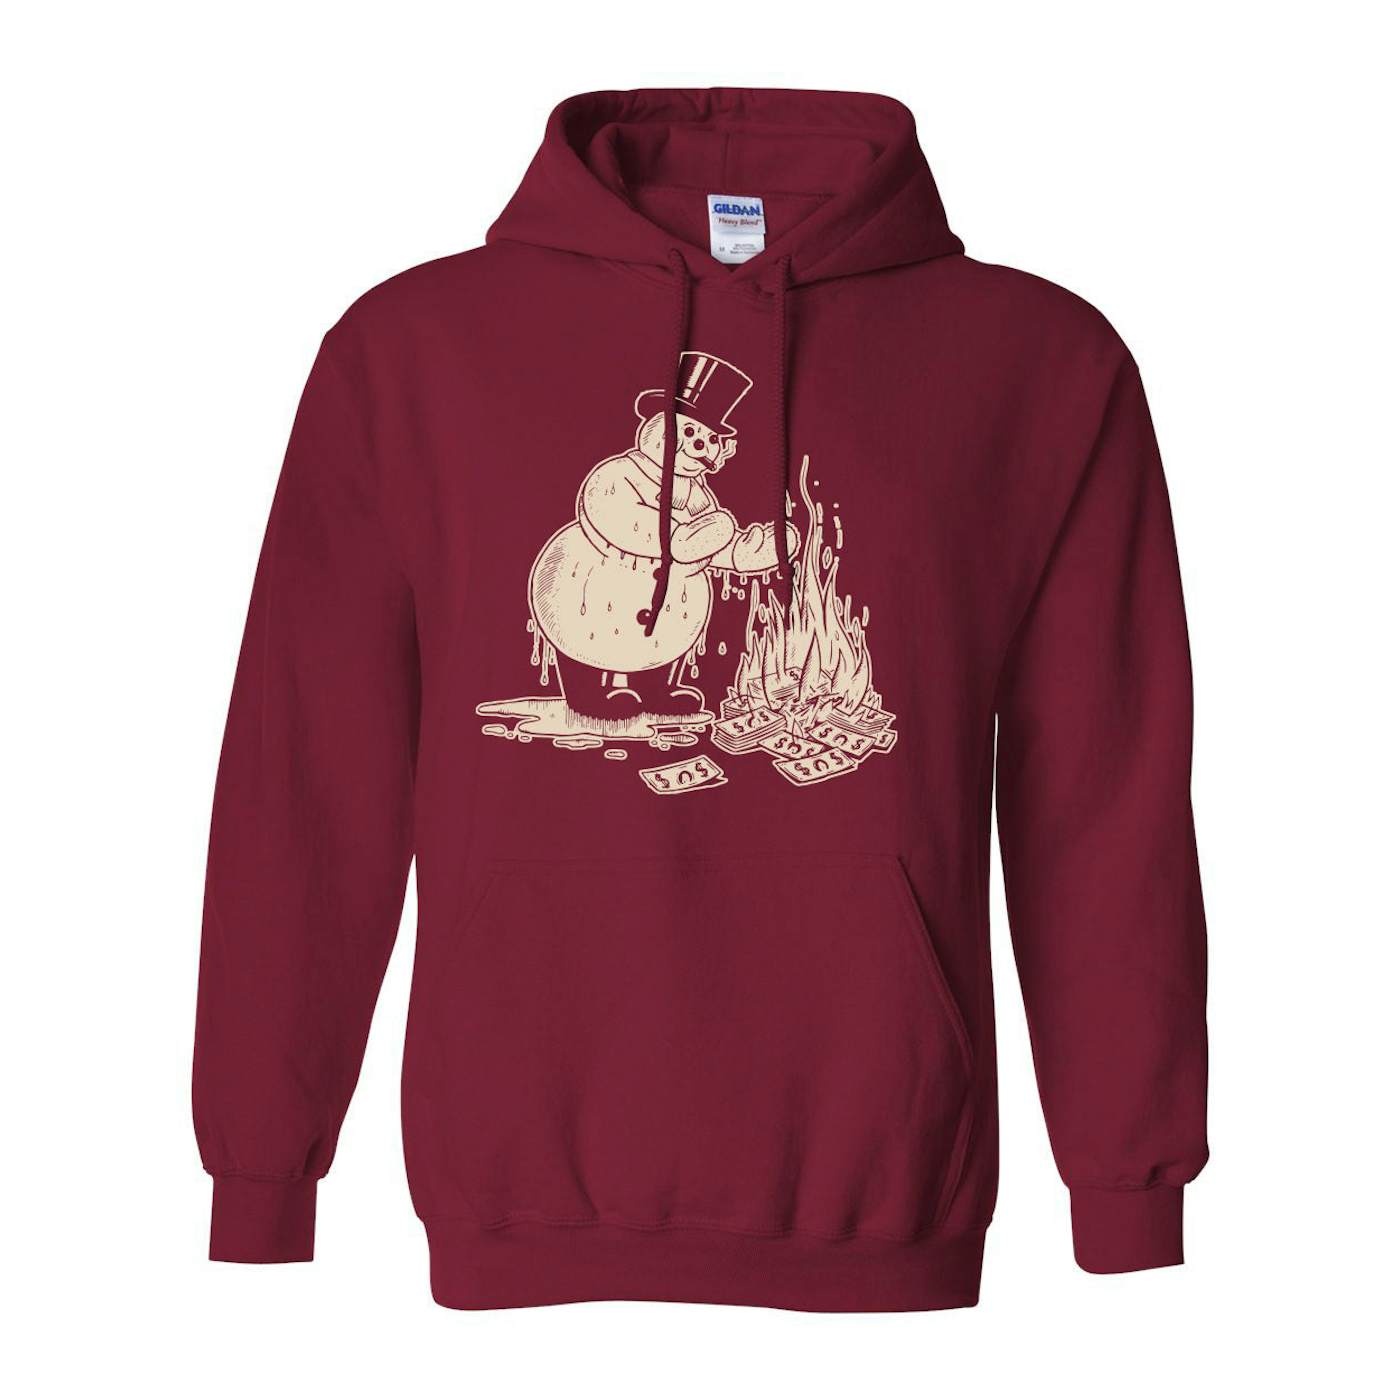 They Might Be Giants Snowman Hoodie on Cardinal Red (Unisex)